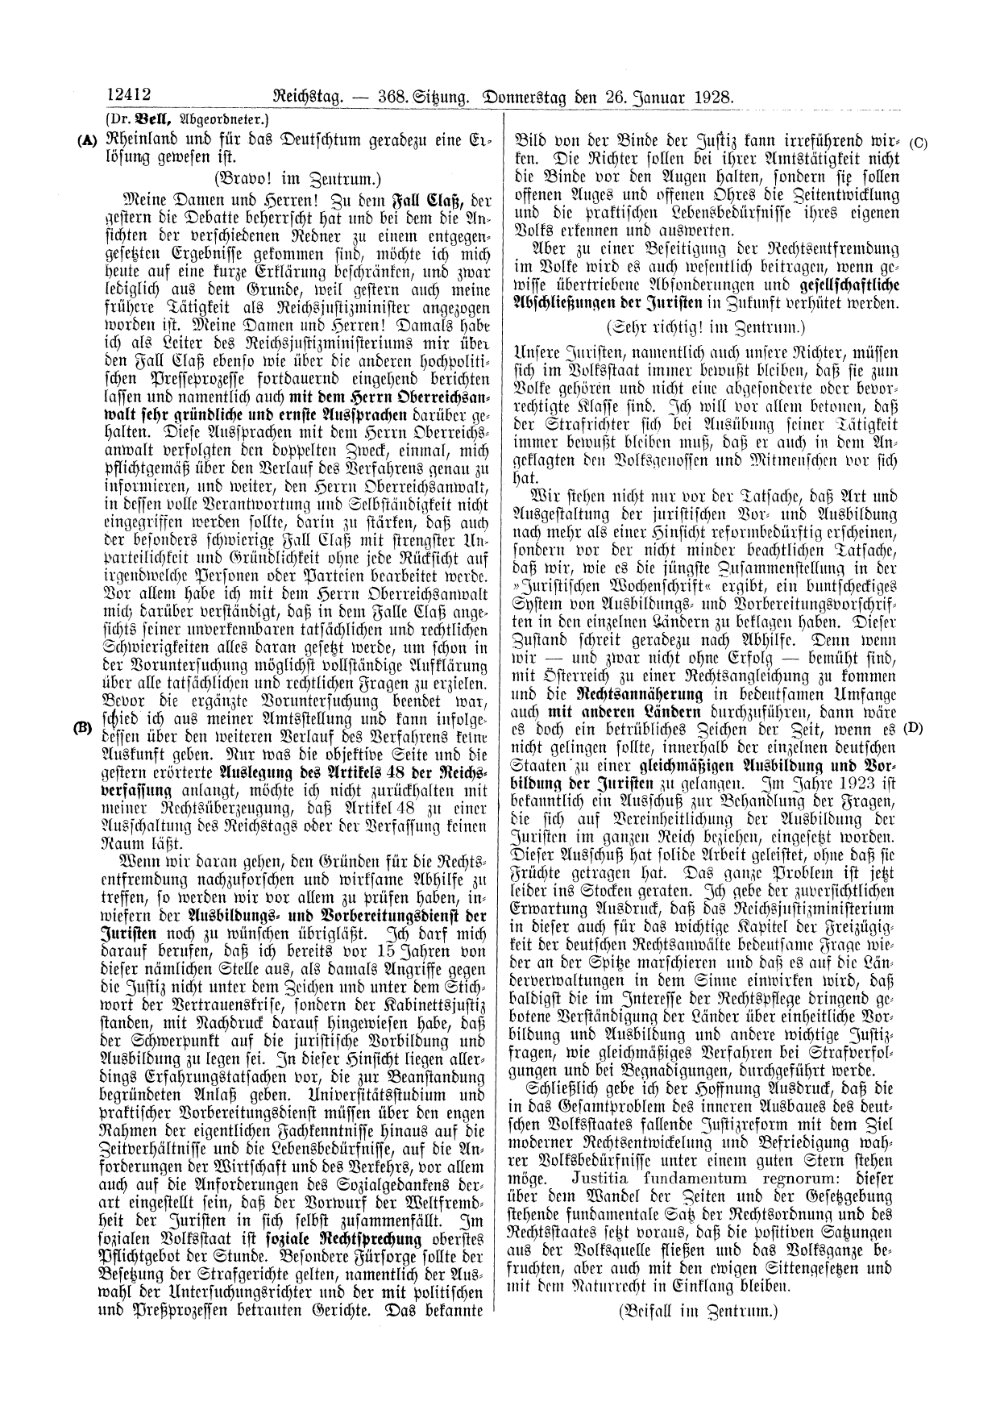 Scan of page 12412